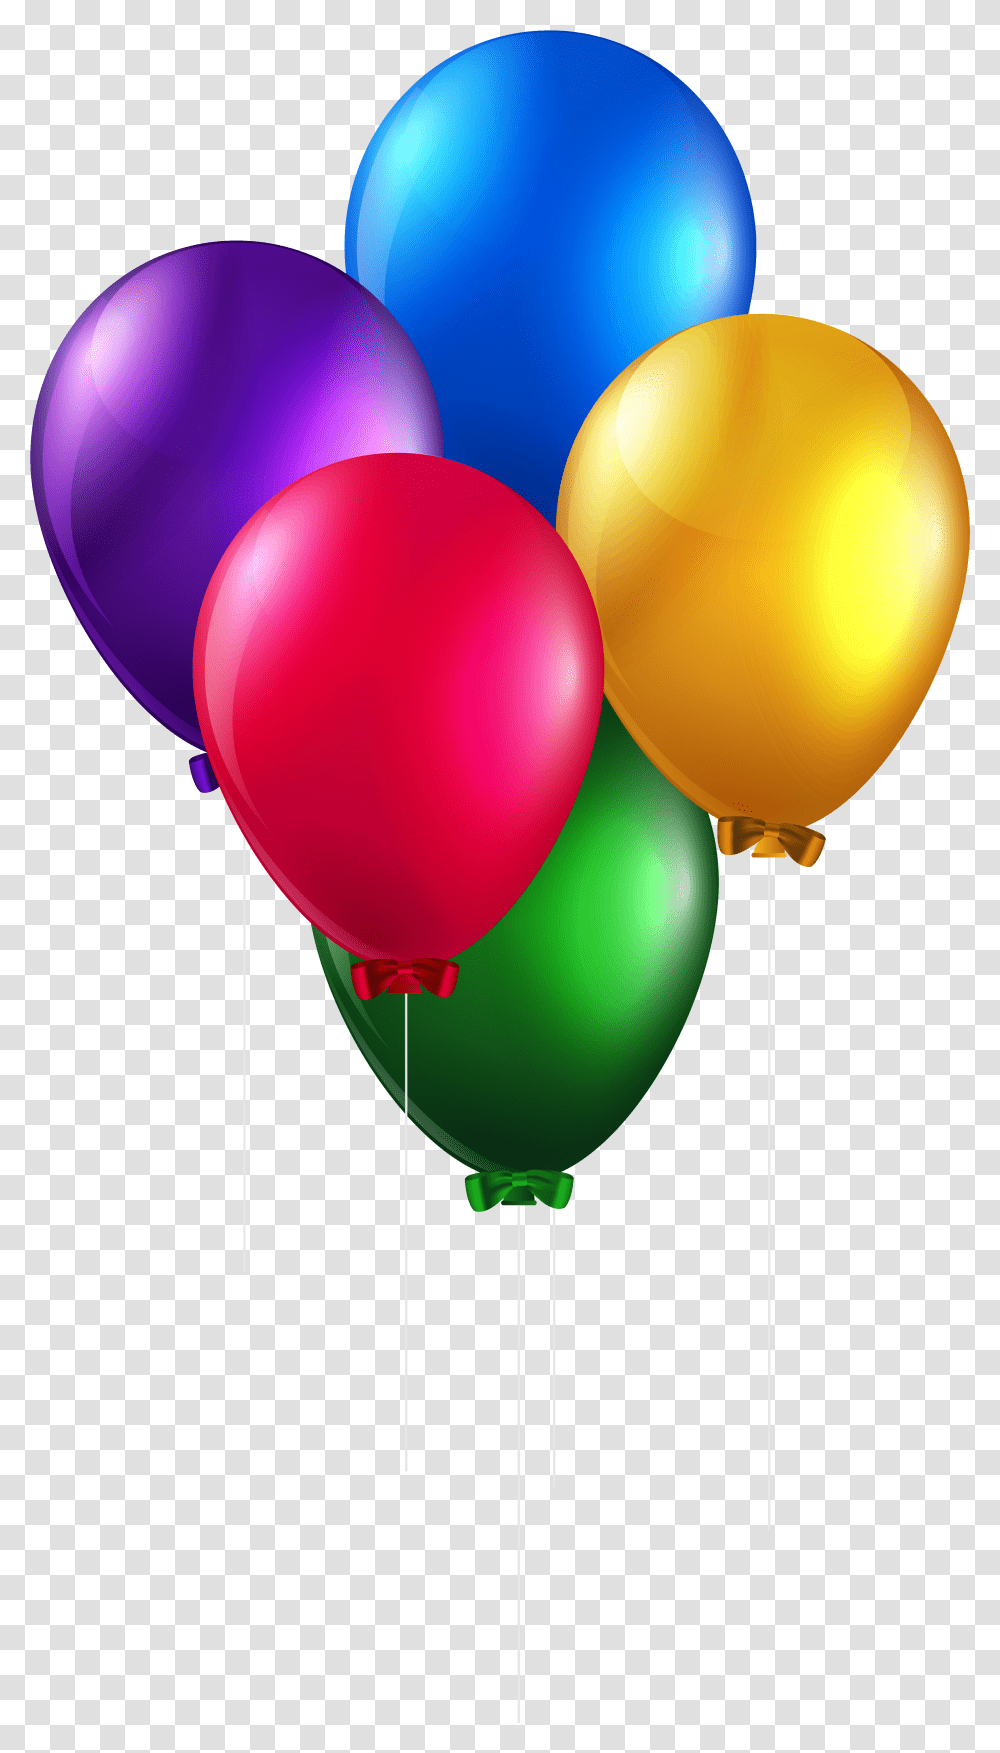 Balloon Clipart Colorful Balloon Background Balloon Clipart Transparent Png